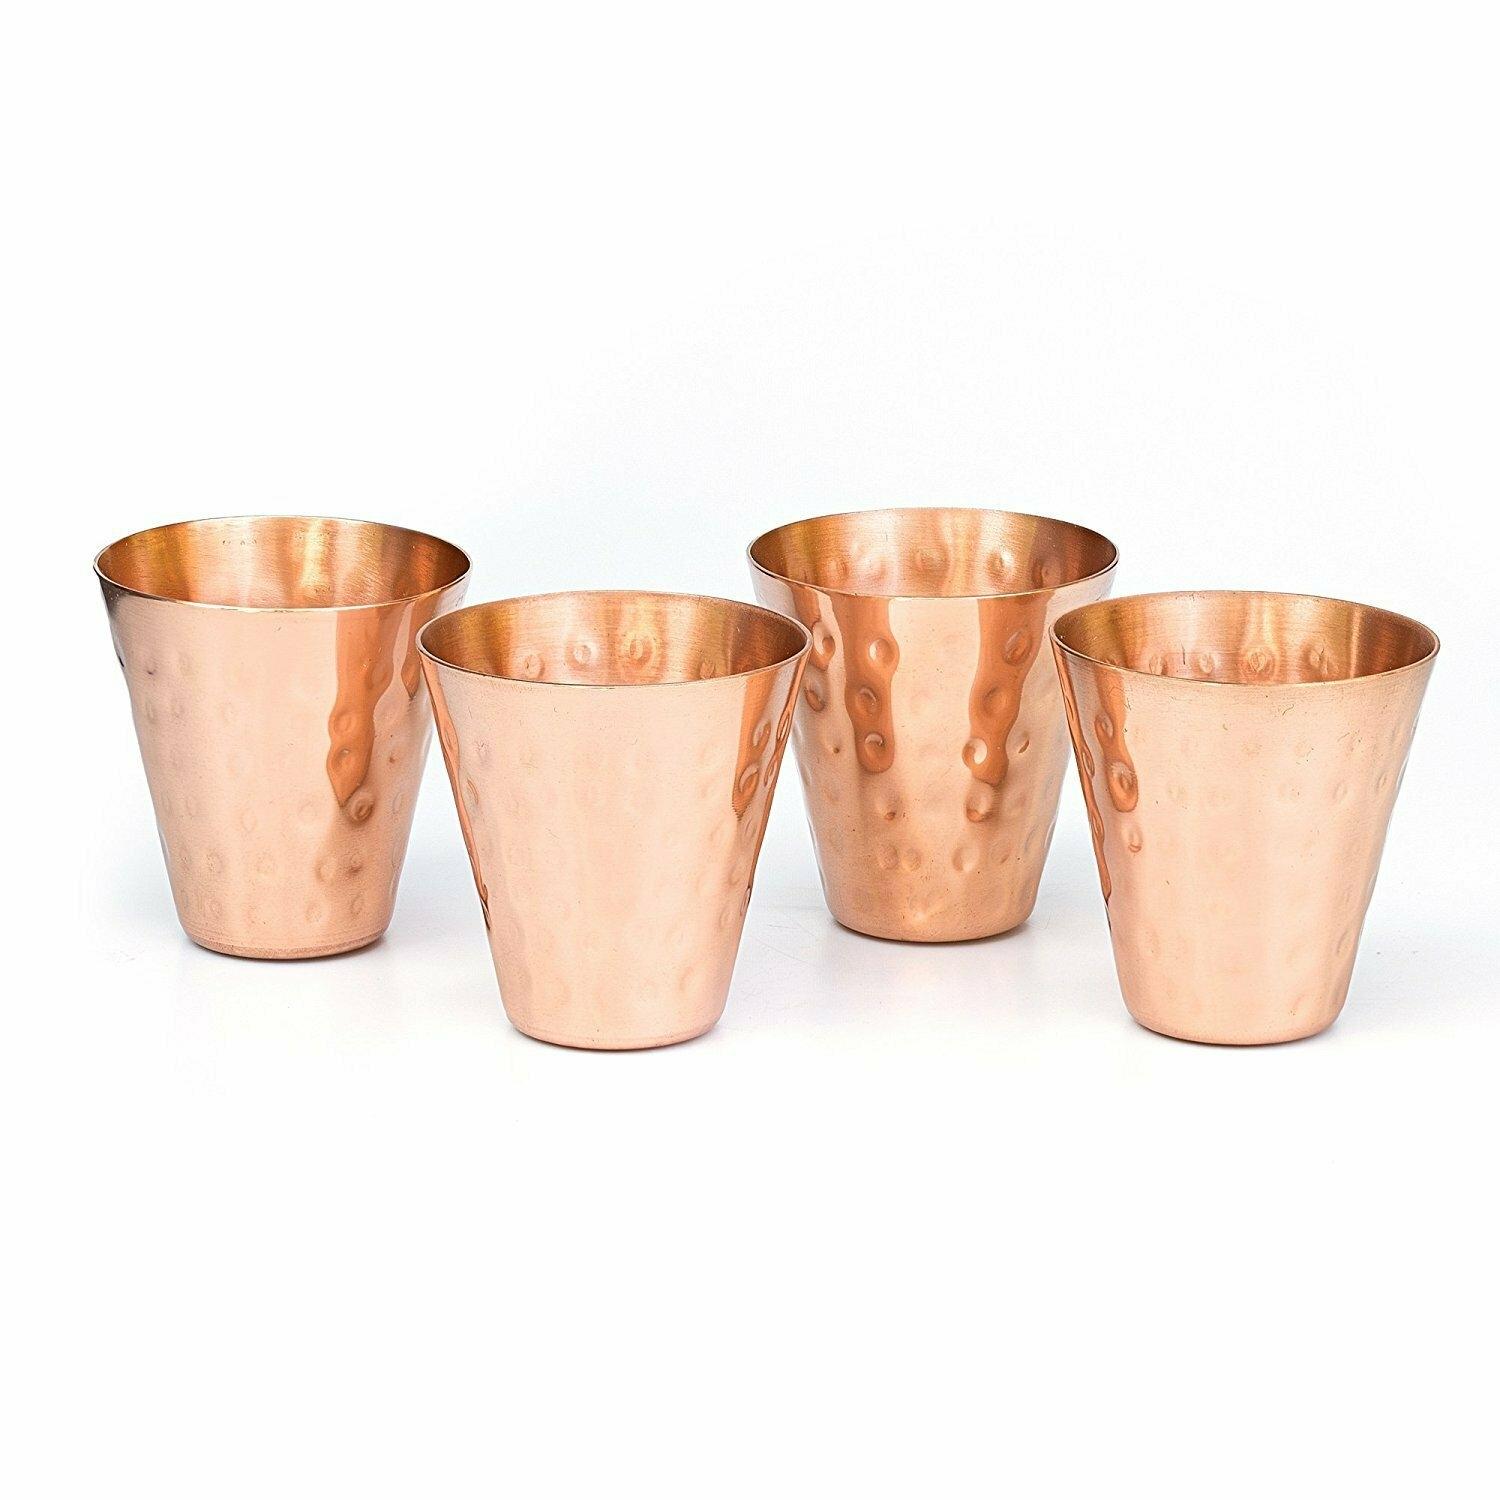 Solid Copper Drinking Straw for Beer Prisha India Craft Cups/Mugs And Cocktail Glasses Set of 4 Vodka Beer Bar Collection 